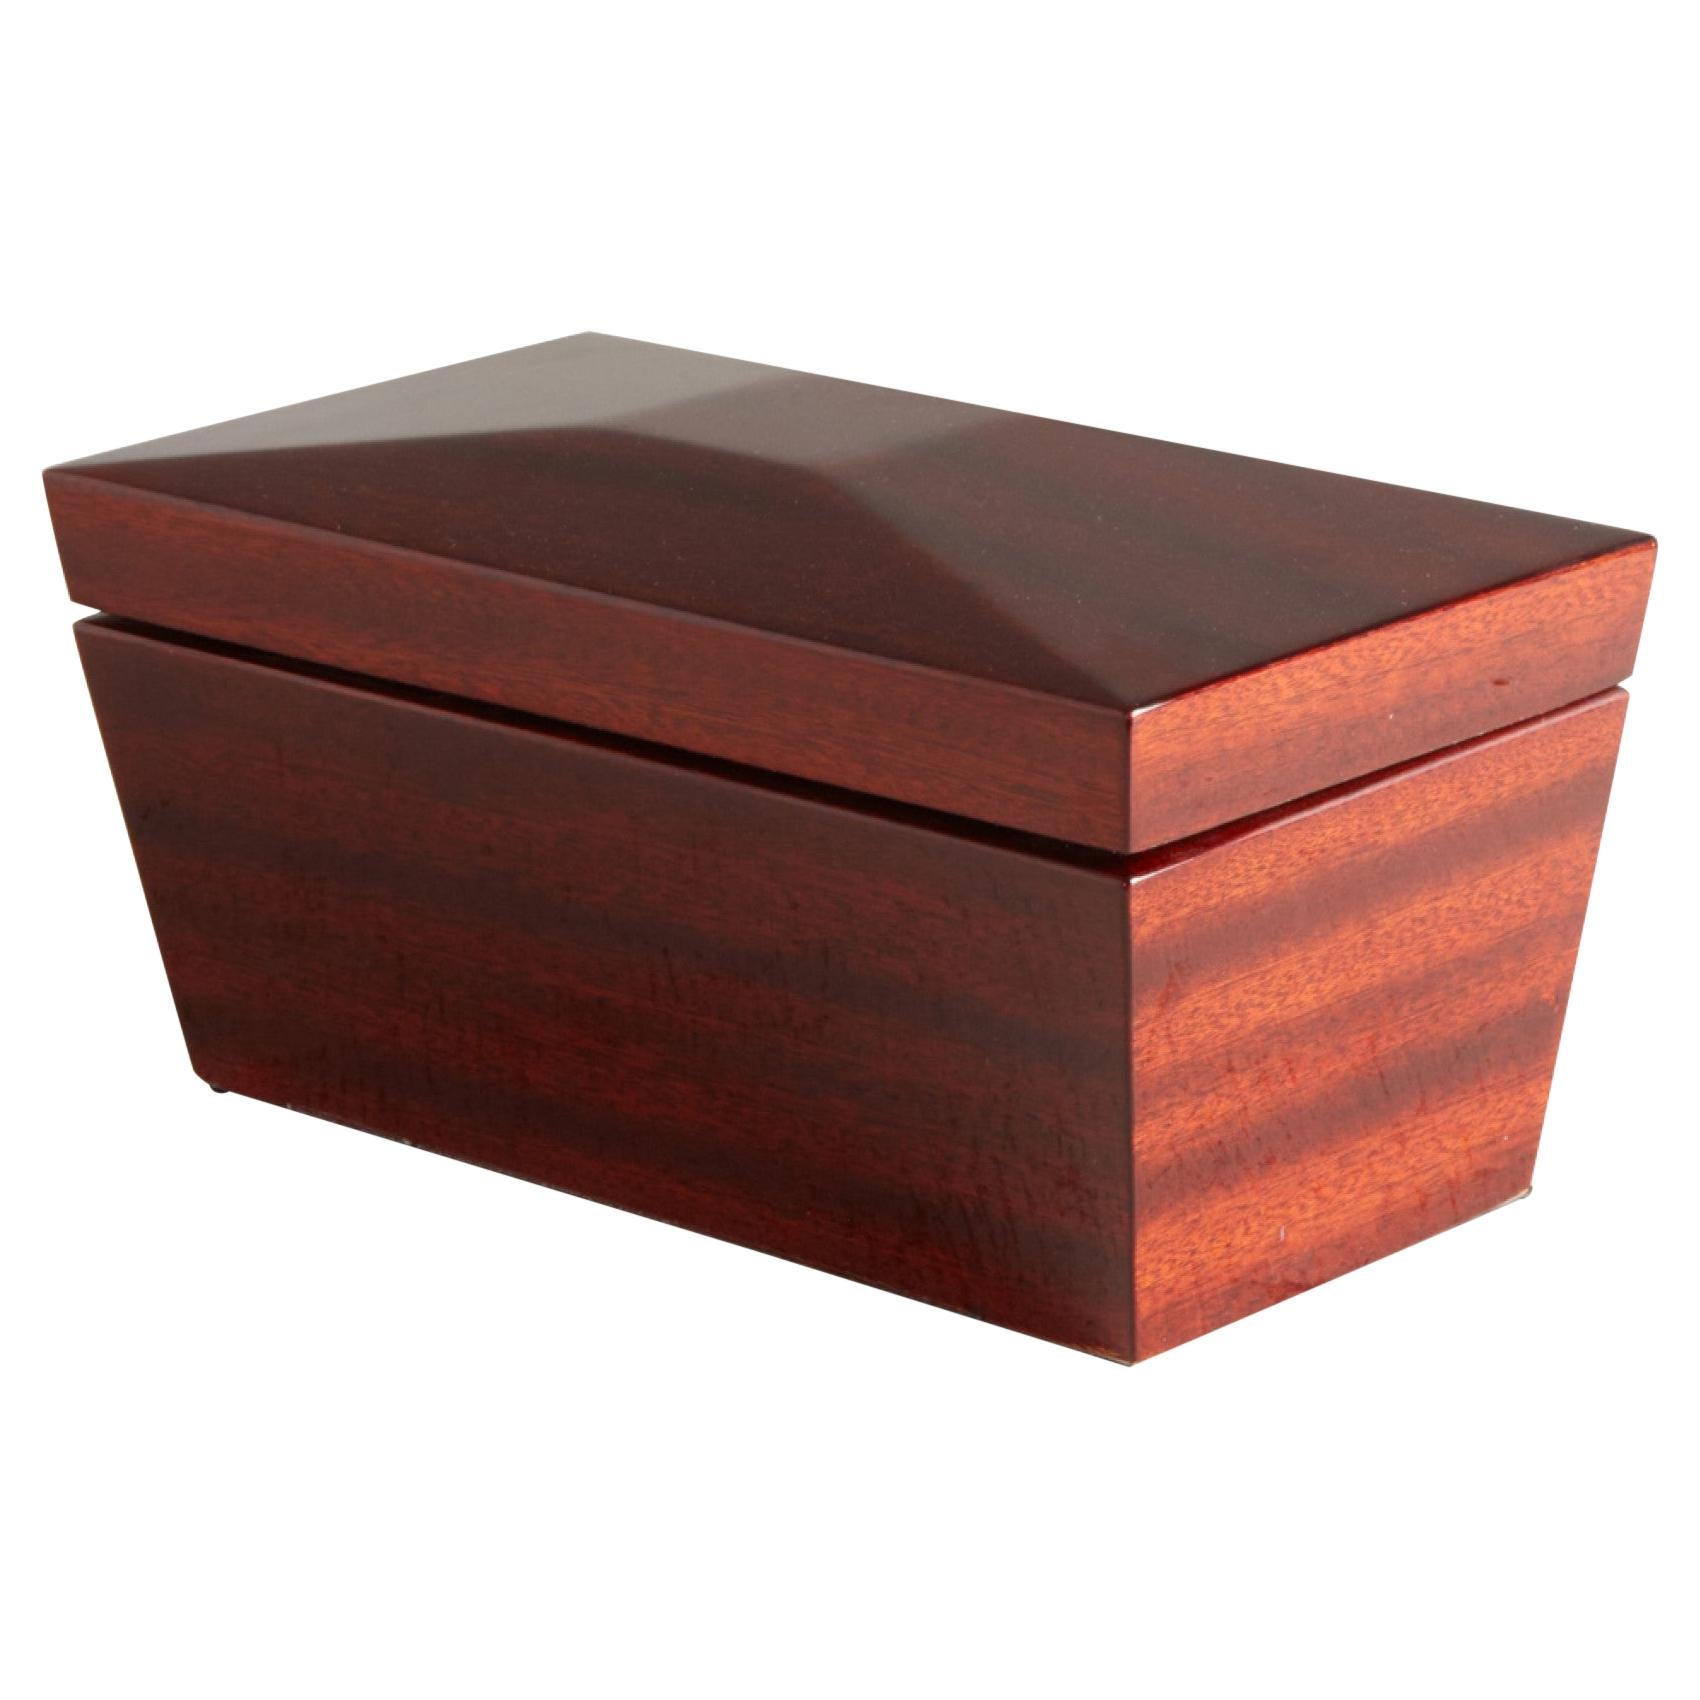 Contemporary Lacquered Cherry Wood Rectangular Decorative Box For Sale